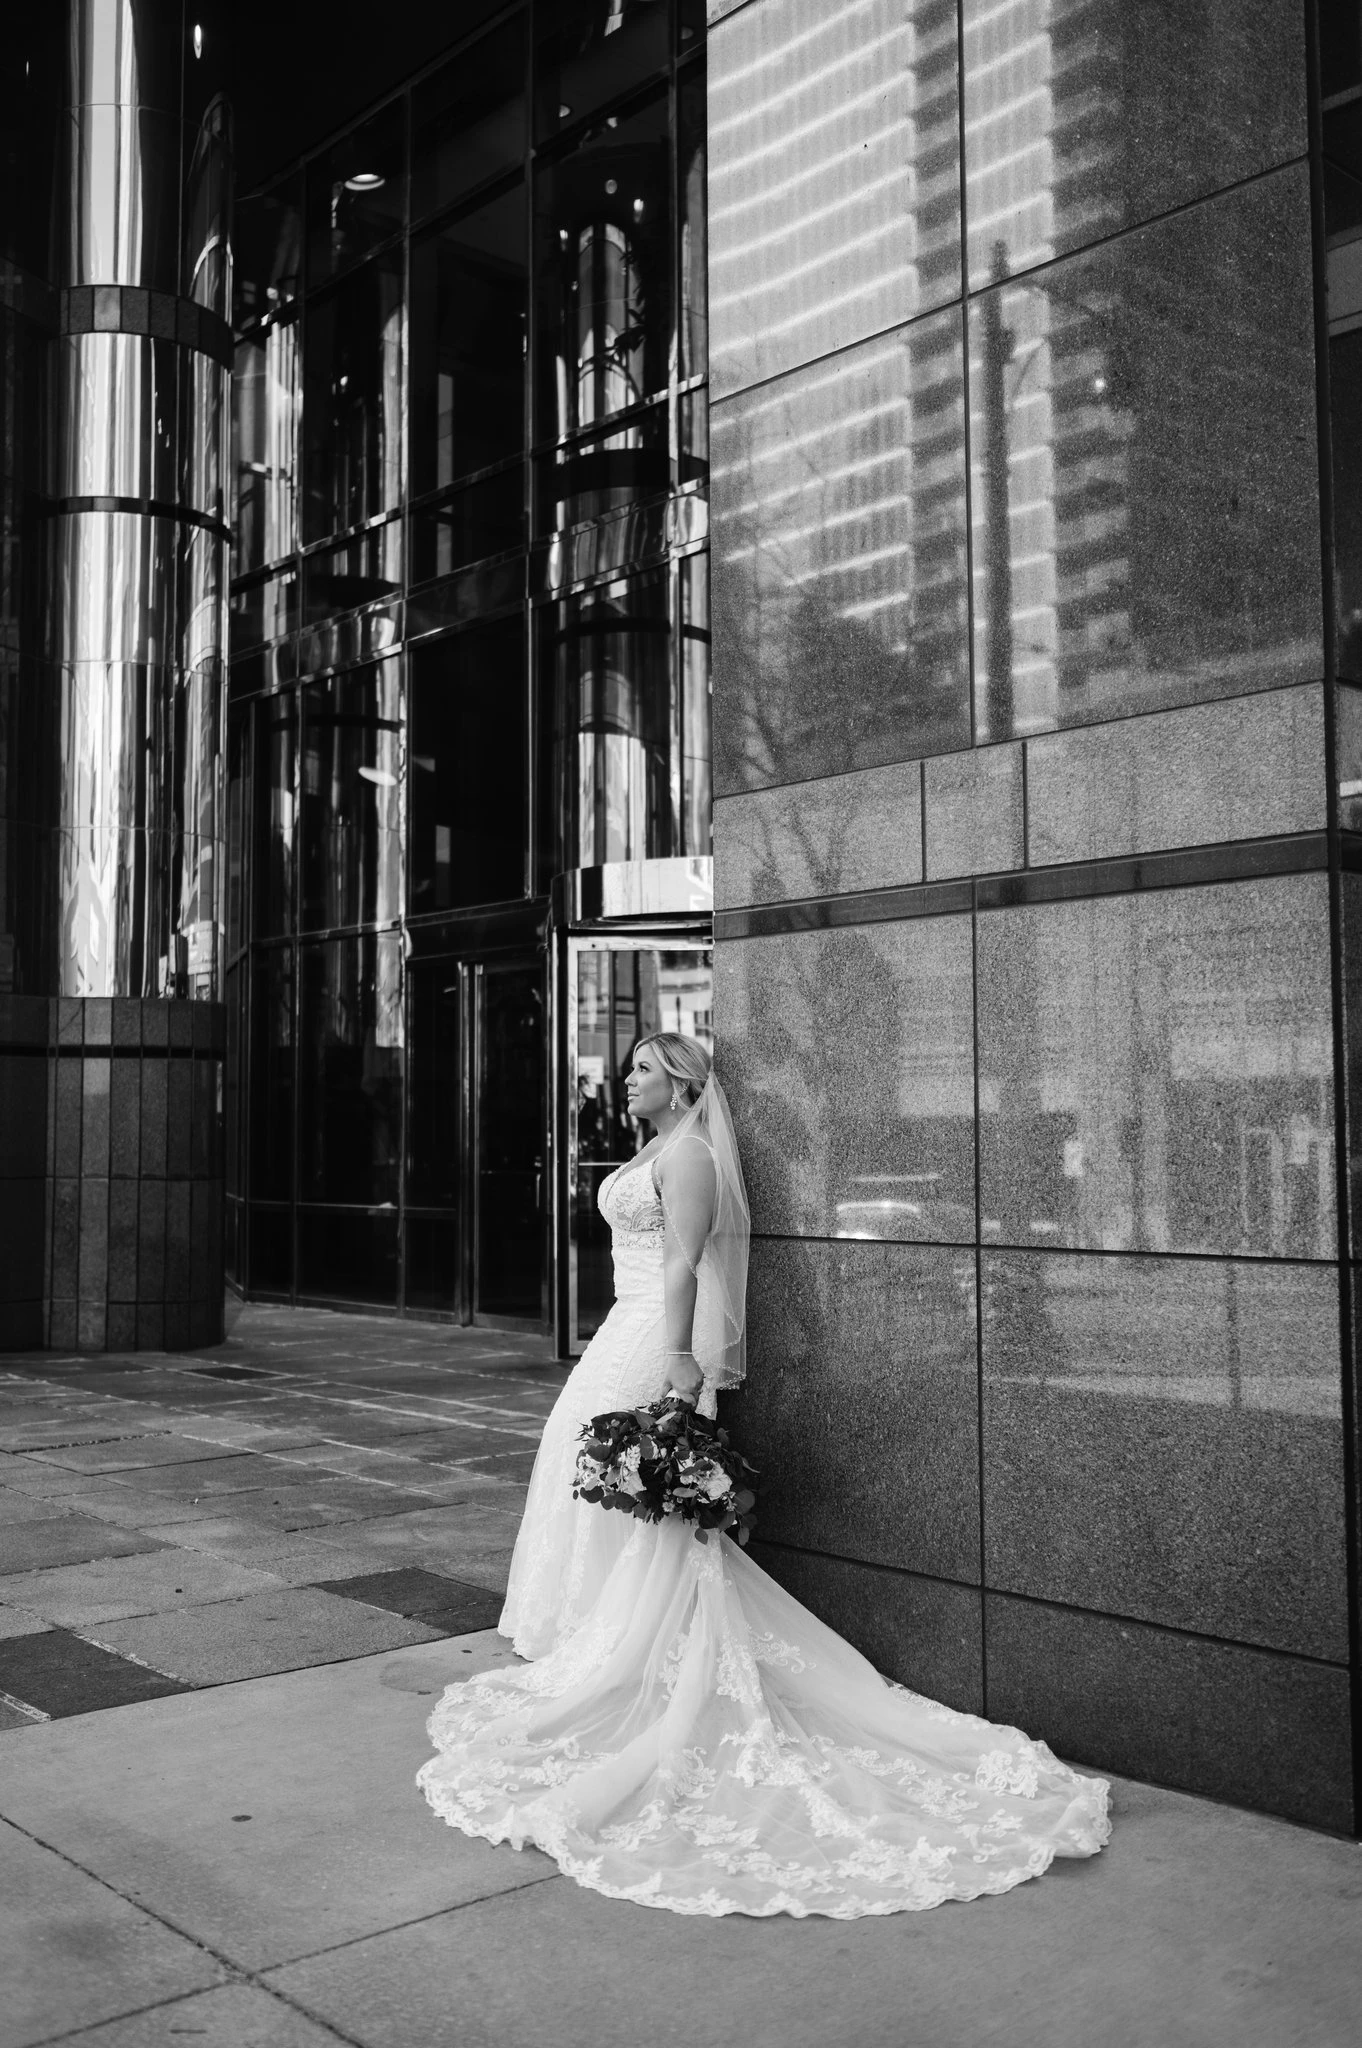 Bride holding flowers leaning against a building